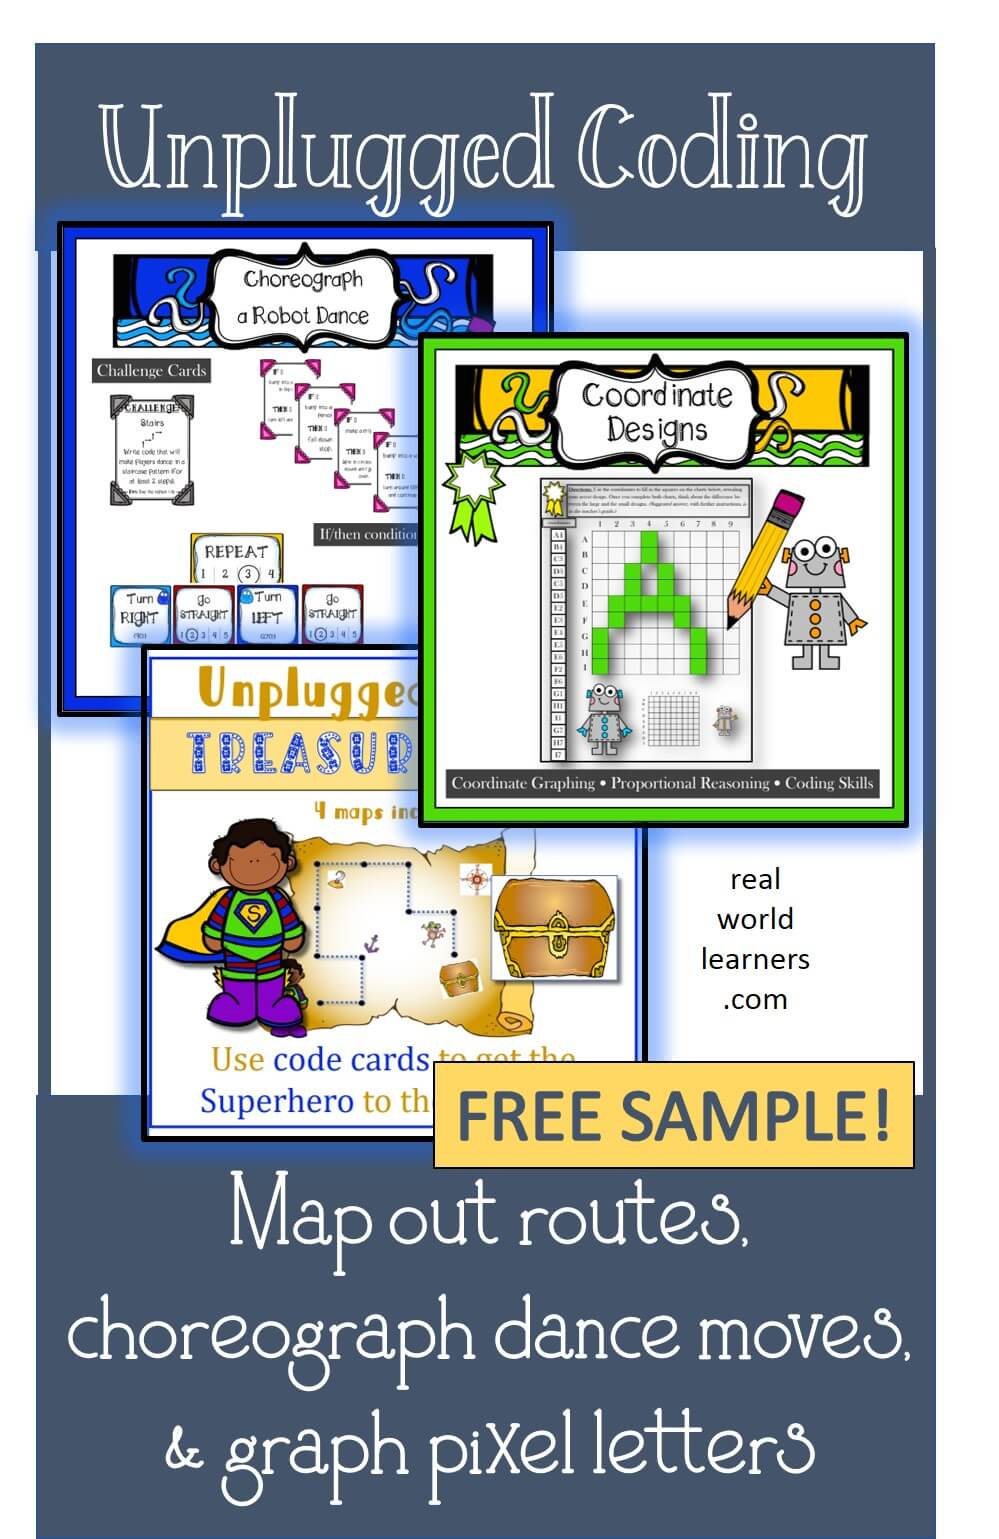 free map out routs, choreograph dance moves, and graph pixel letters